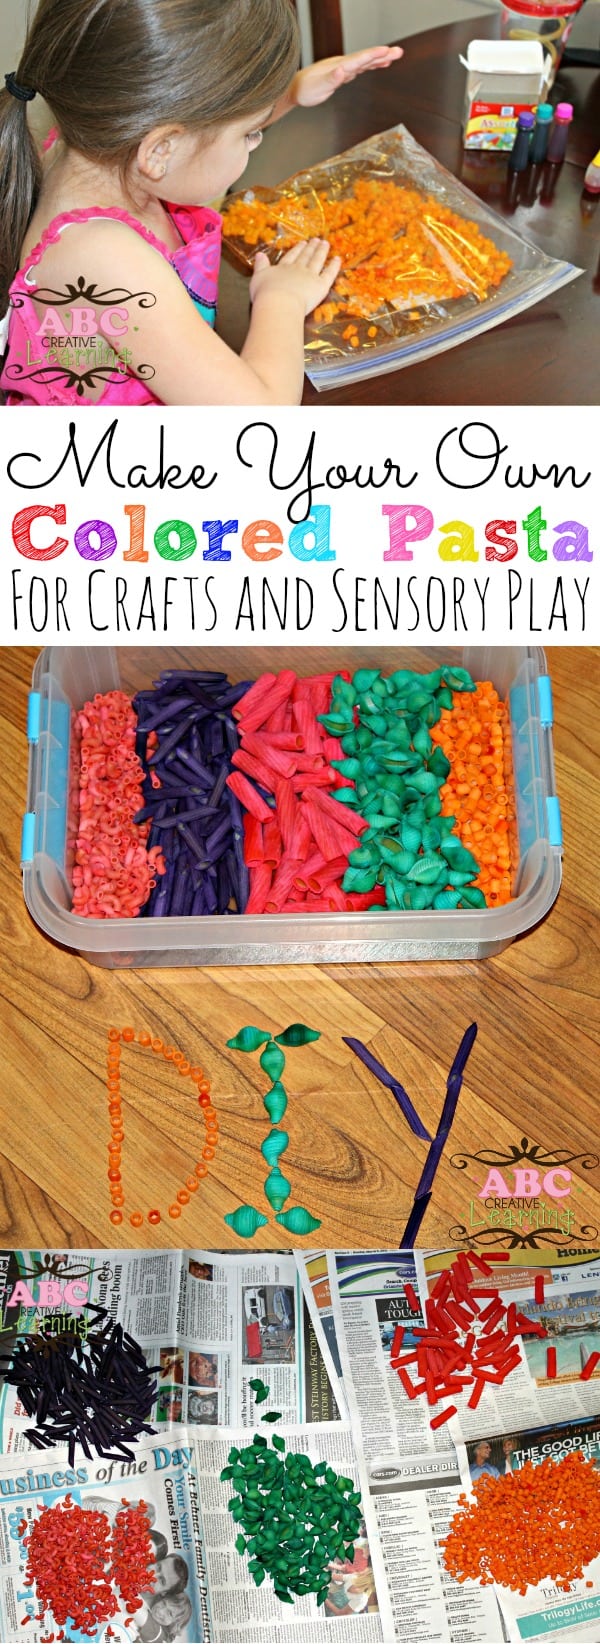 DIY Colored Pasta for Crafts and Sensory Play